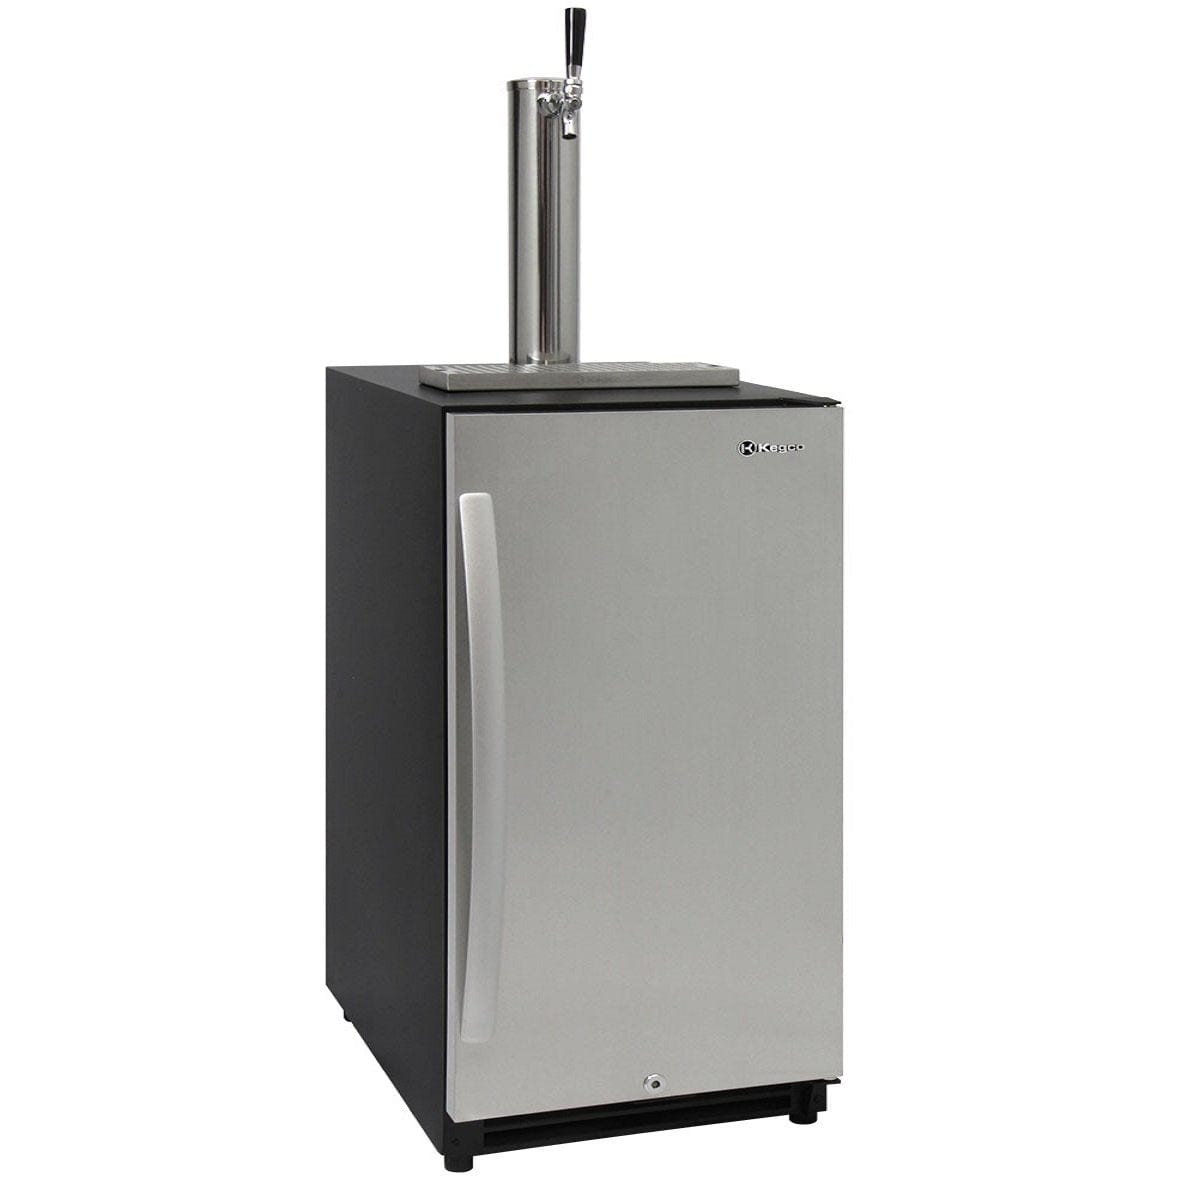 Kegco 15&quot; Wide Single Tap Stainless Steel Built-In Right Hinge Kegerator